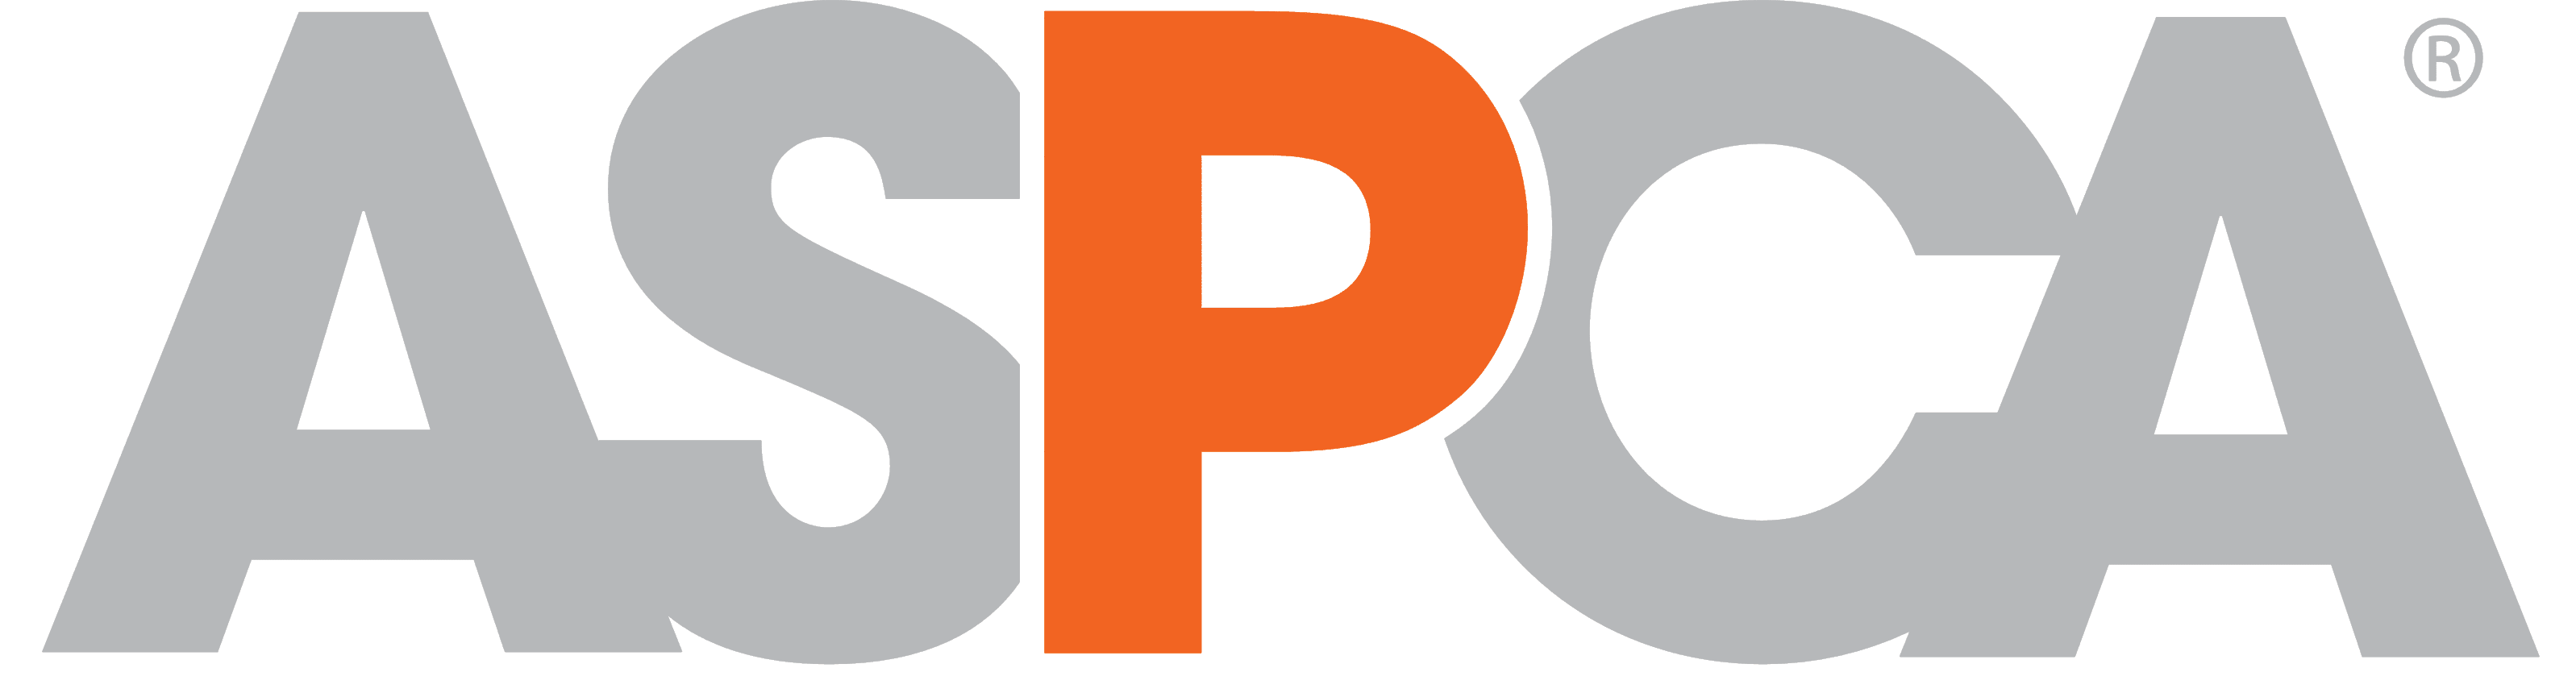 Aspca Logo And Symbol Meaning History Png